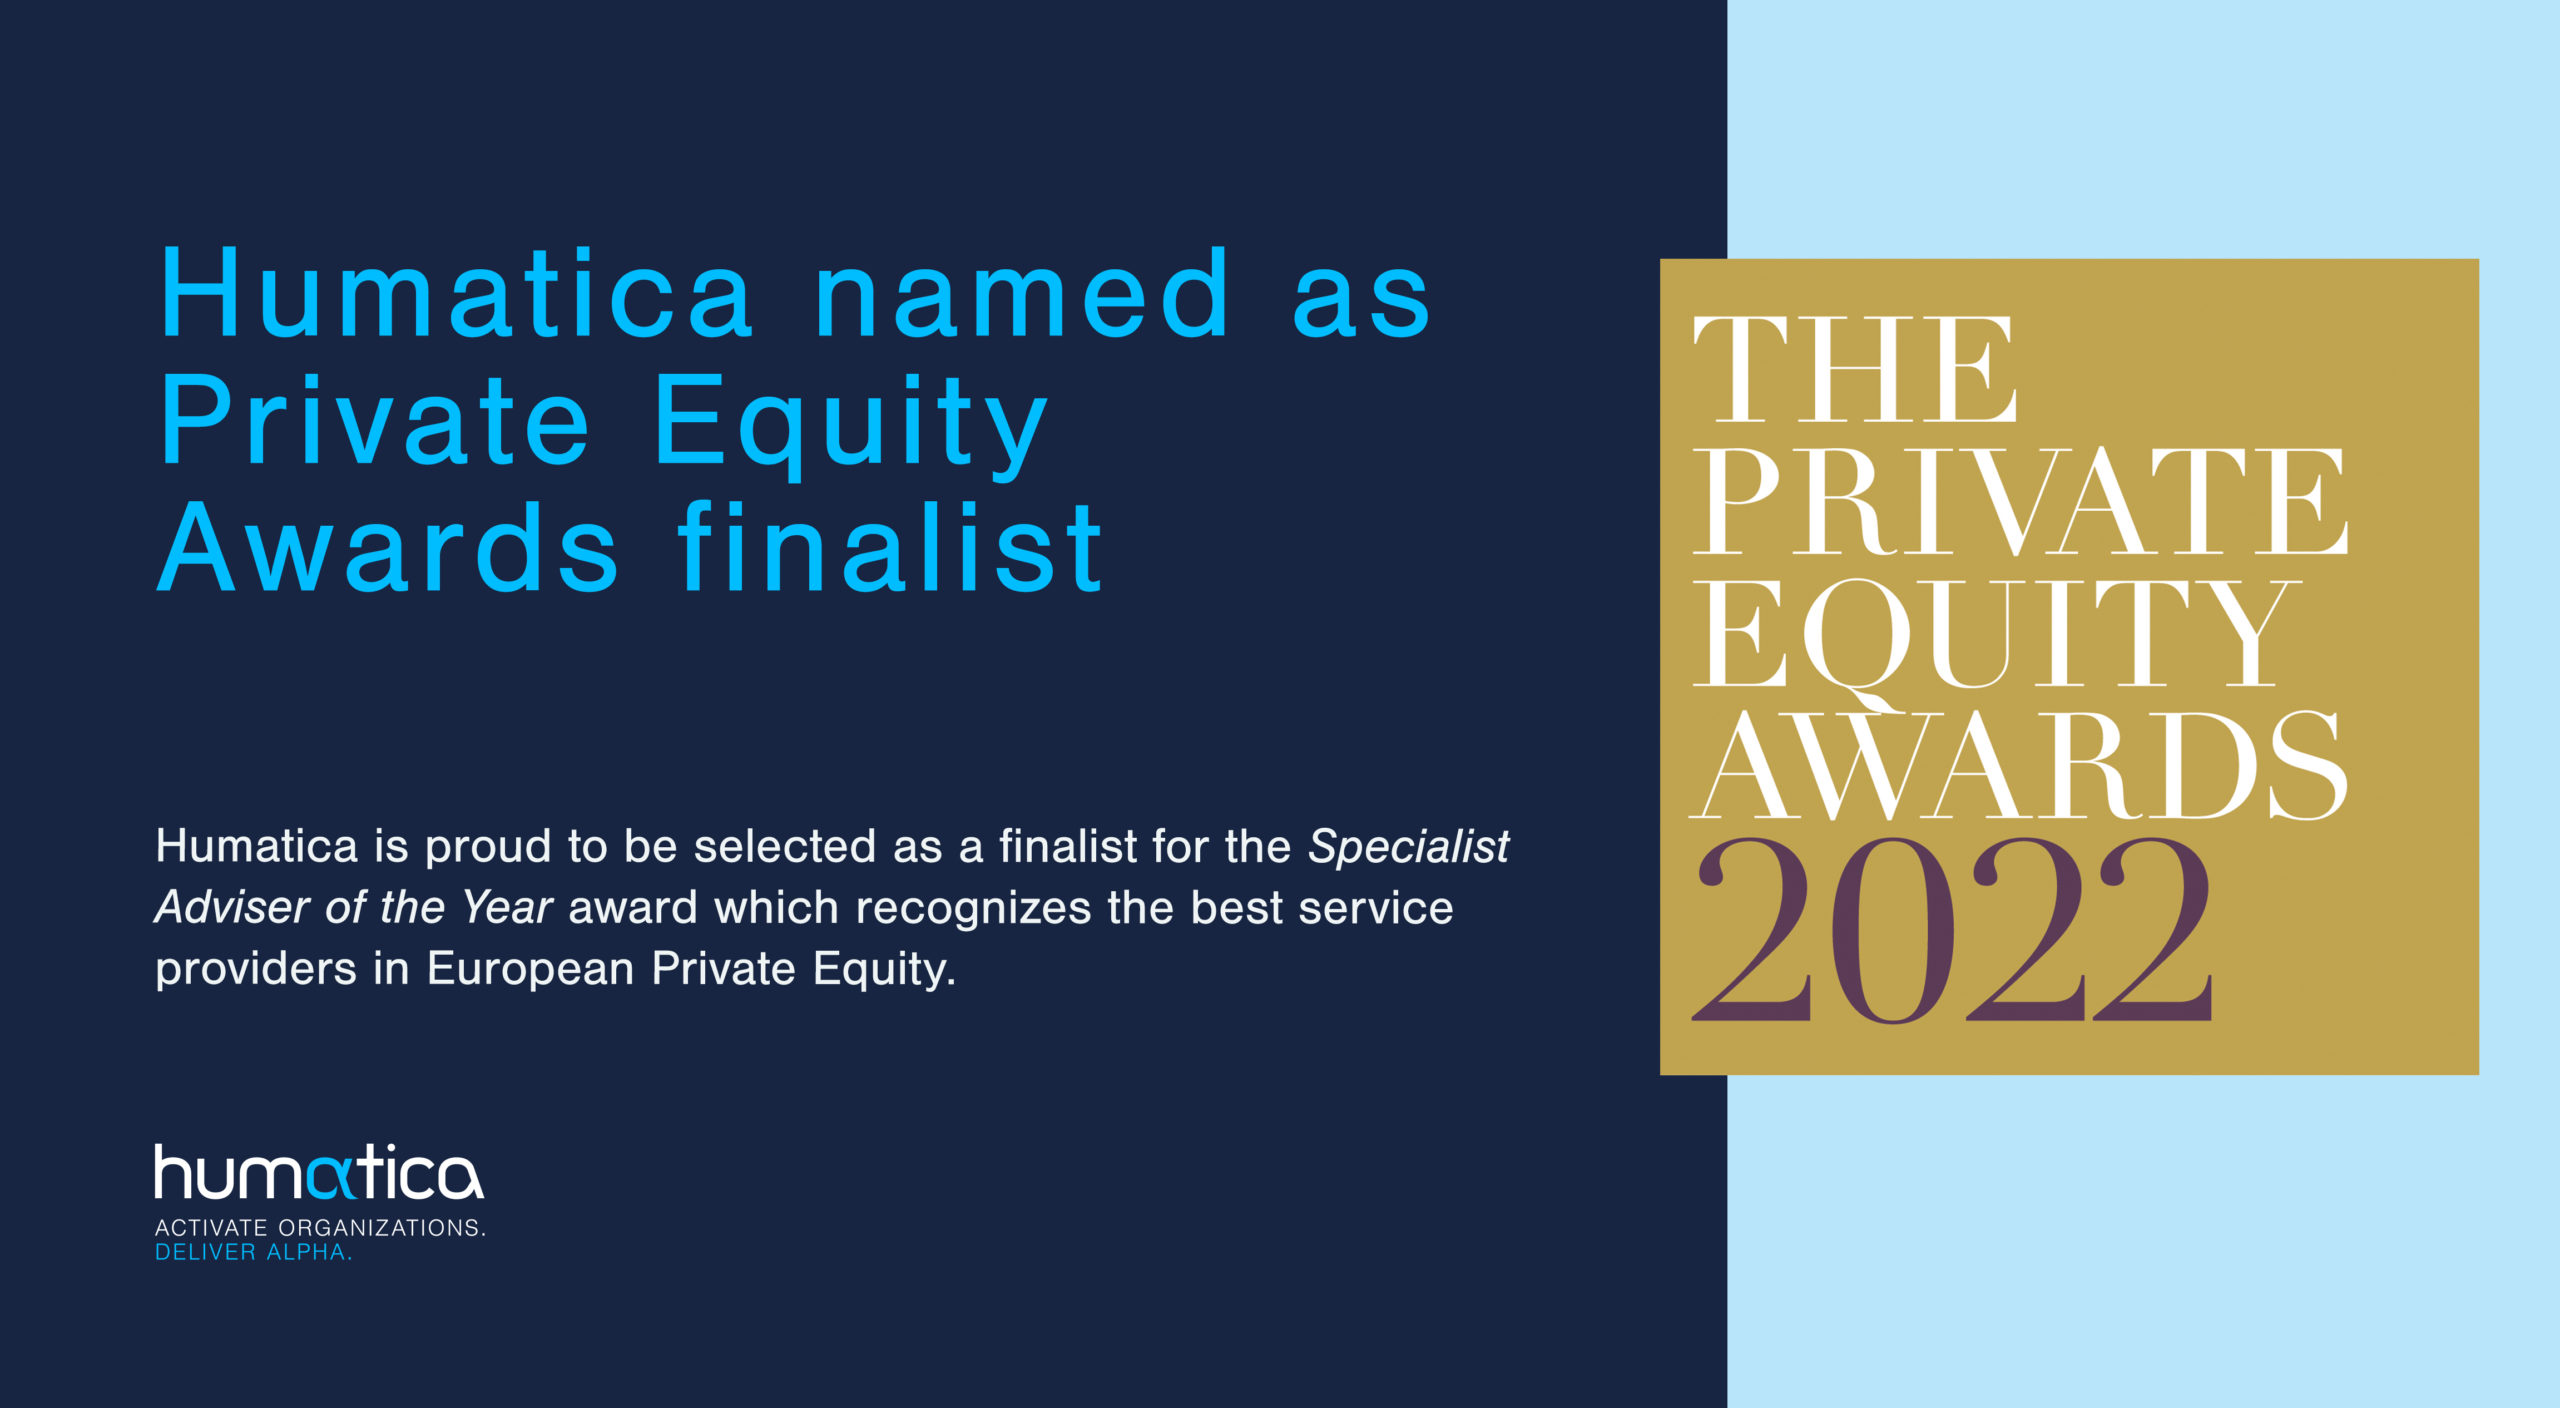 Humatica named as Private Equity Awards finalist